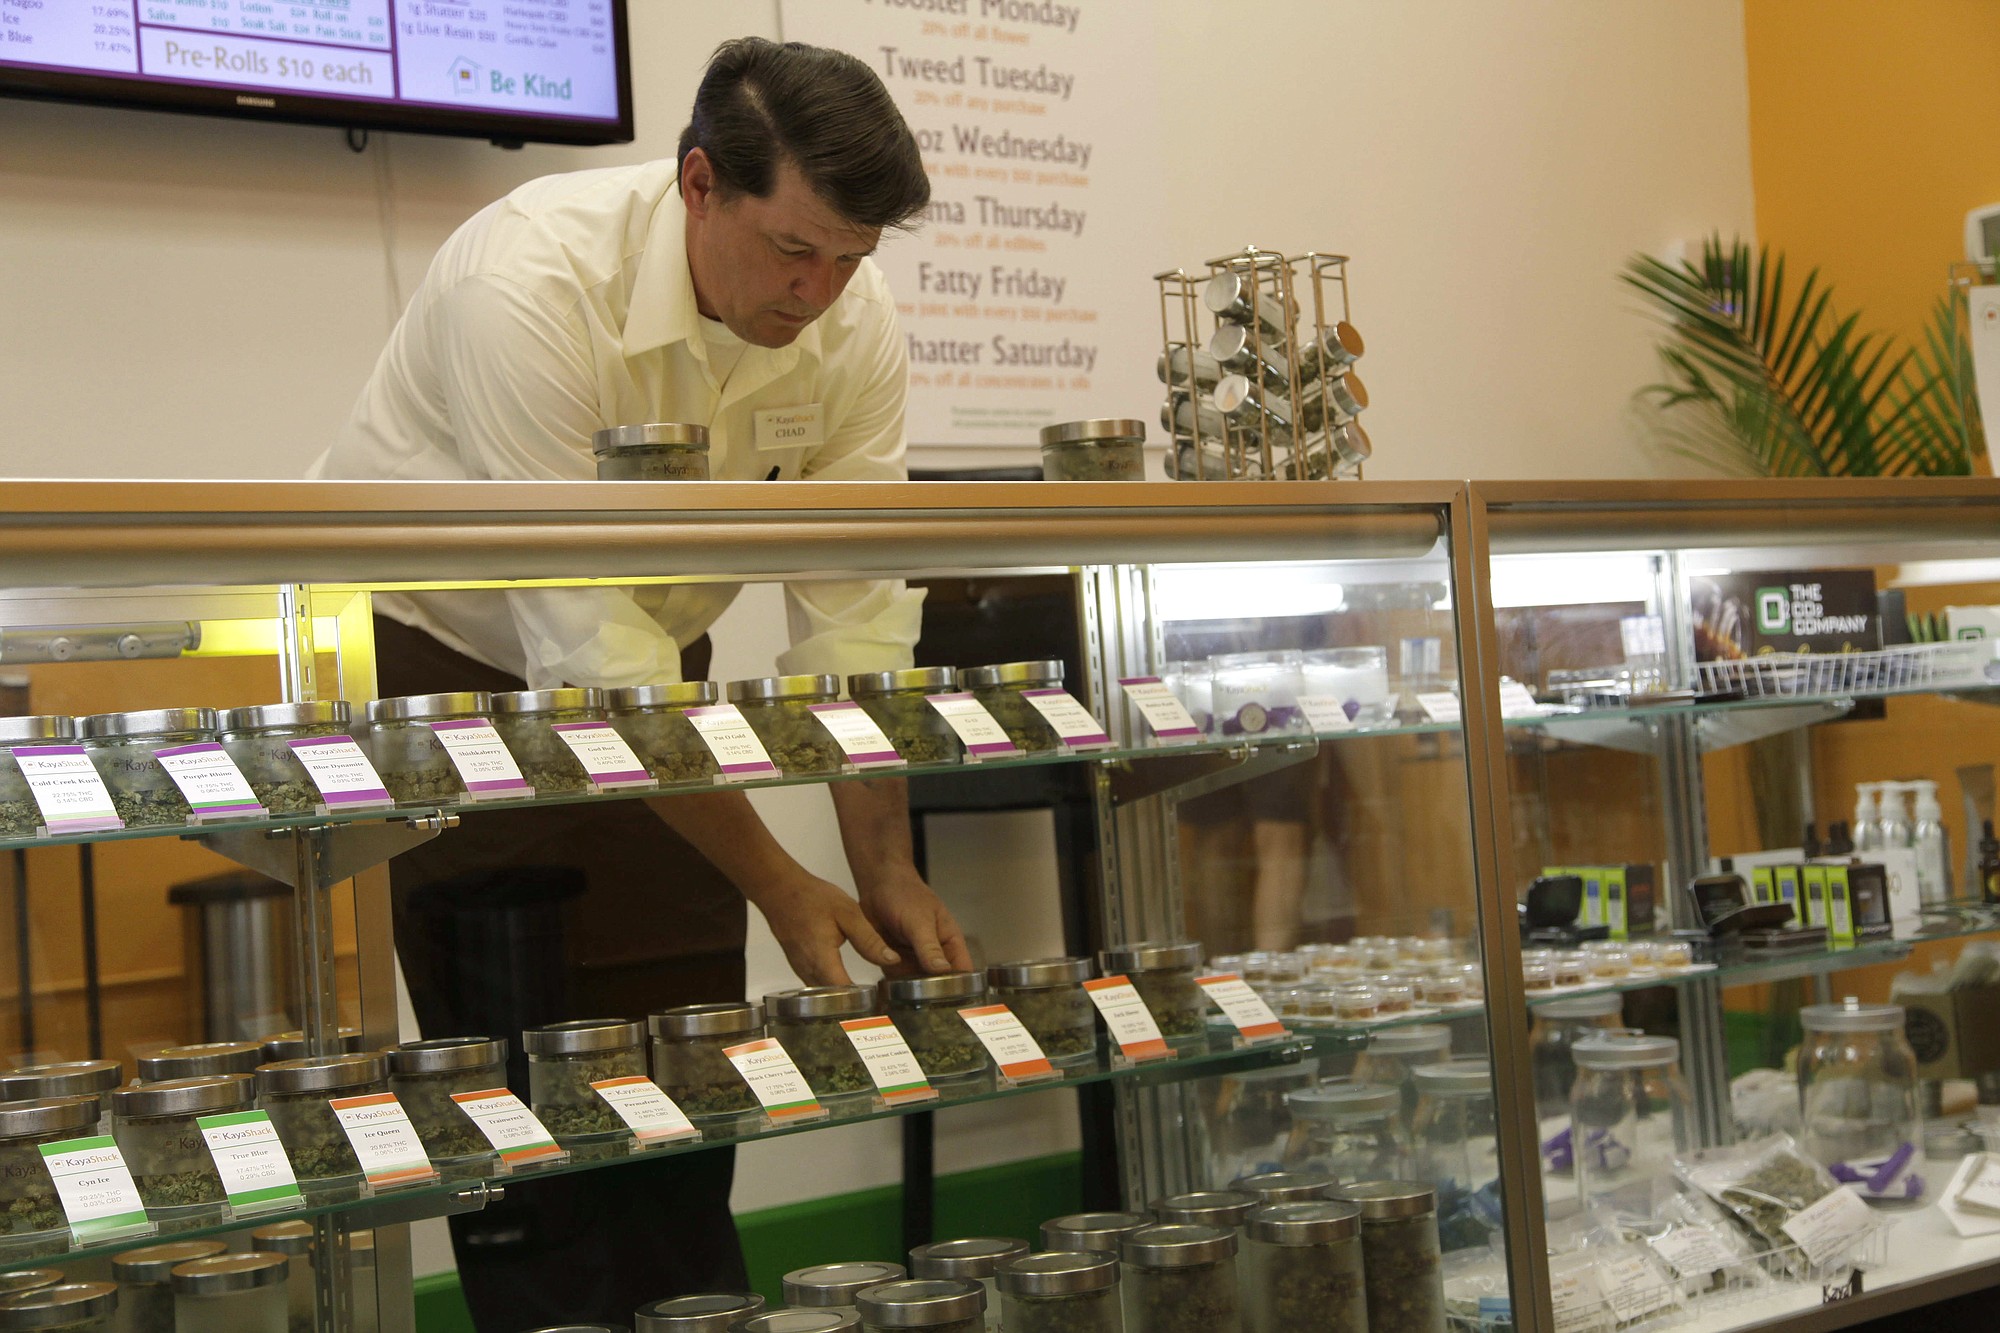 FILE - In this June 26, 2015 file photo, Chad Craig , an employee at the medical marijuana dispensary Kaya Shack, puts away jars of marijuana flowers on the dispensary's shelves in Portland, Ore. Oregon applications for permits to open new medical marijuana dispensaries are growing as the Oct. 1 date approaches allowing them to offer retail sales of marijuana to anyone over 21.